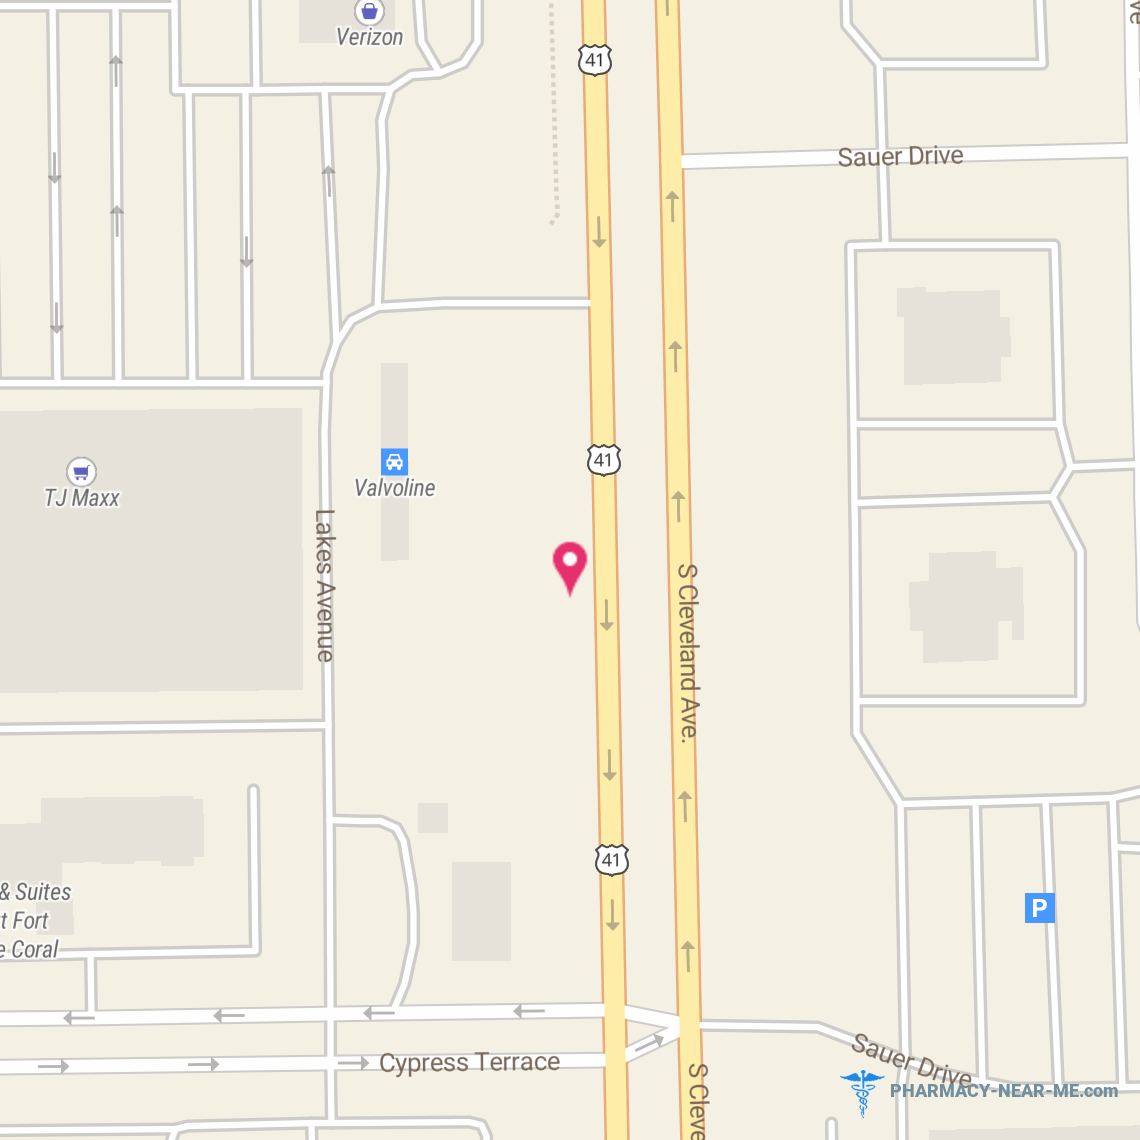 CVS PHARMACY #16265 - Pharmacy Hours, Phone, Reviews & Information: 13711 South Tamiami Trail, Fort Myers, Florida 33912, United States